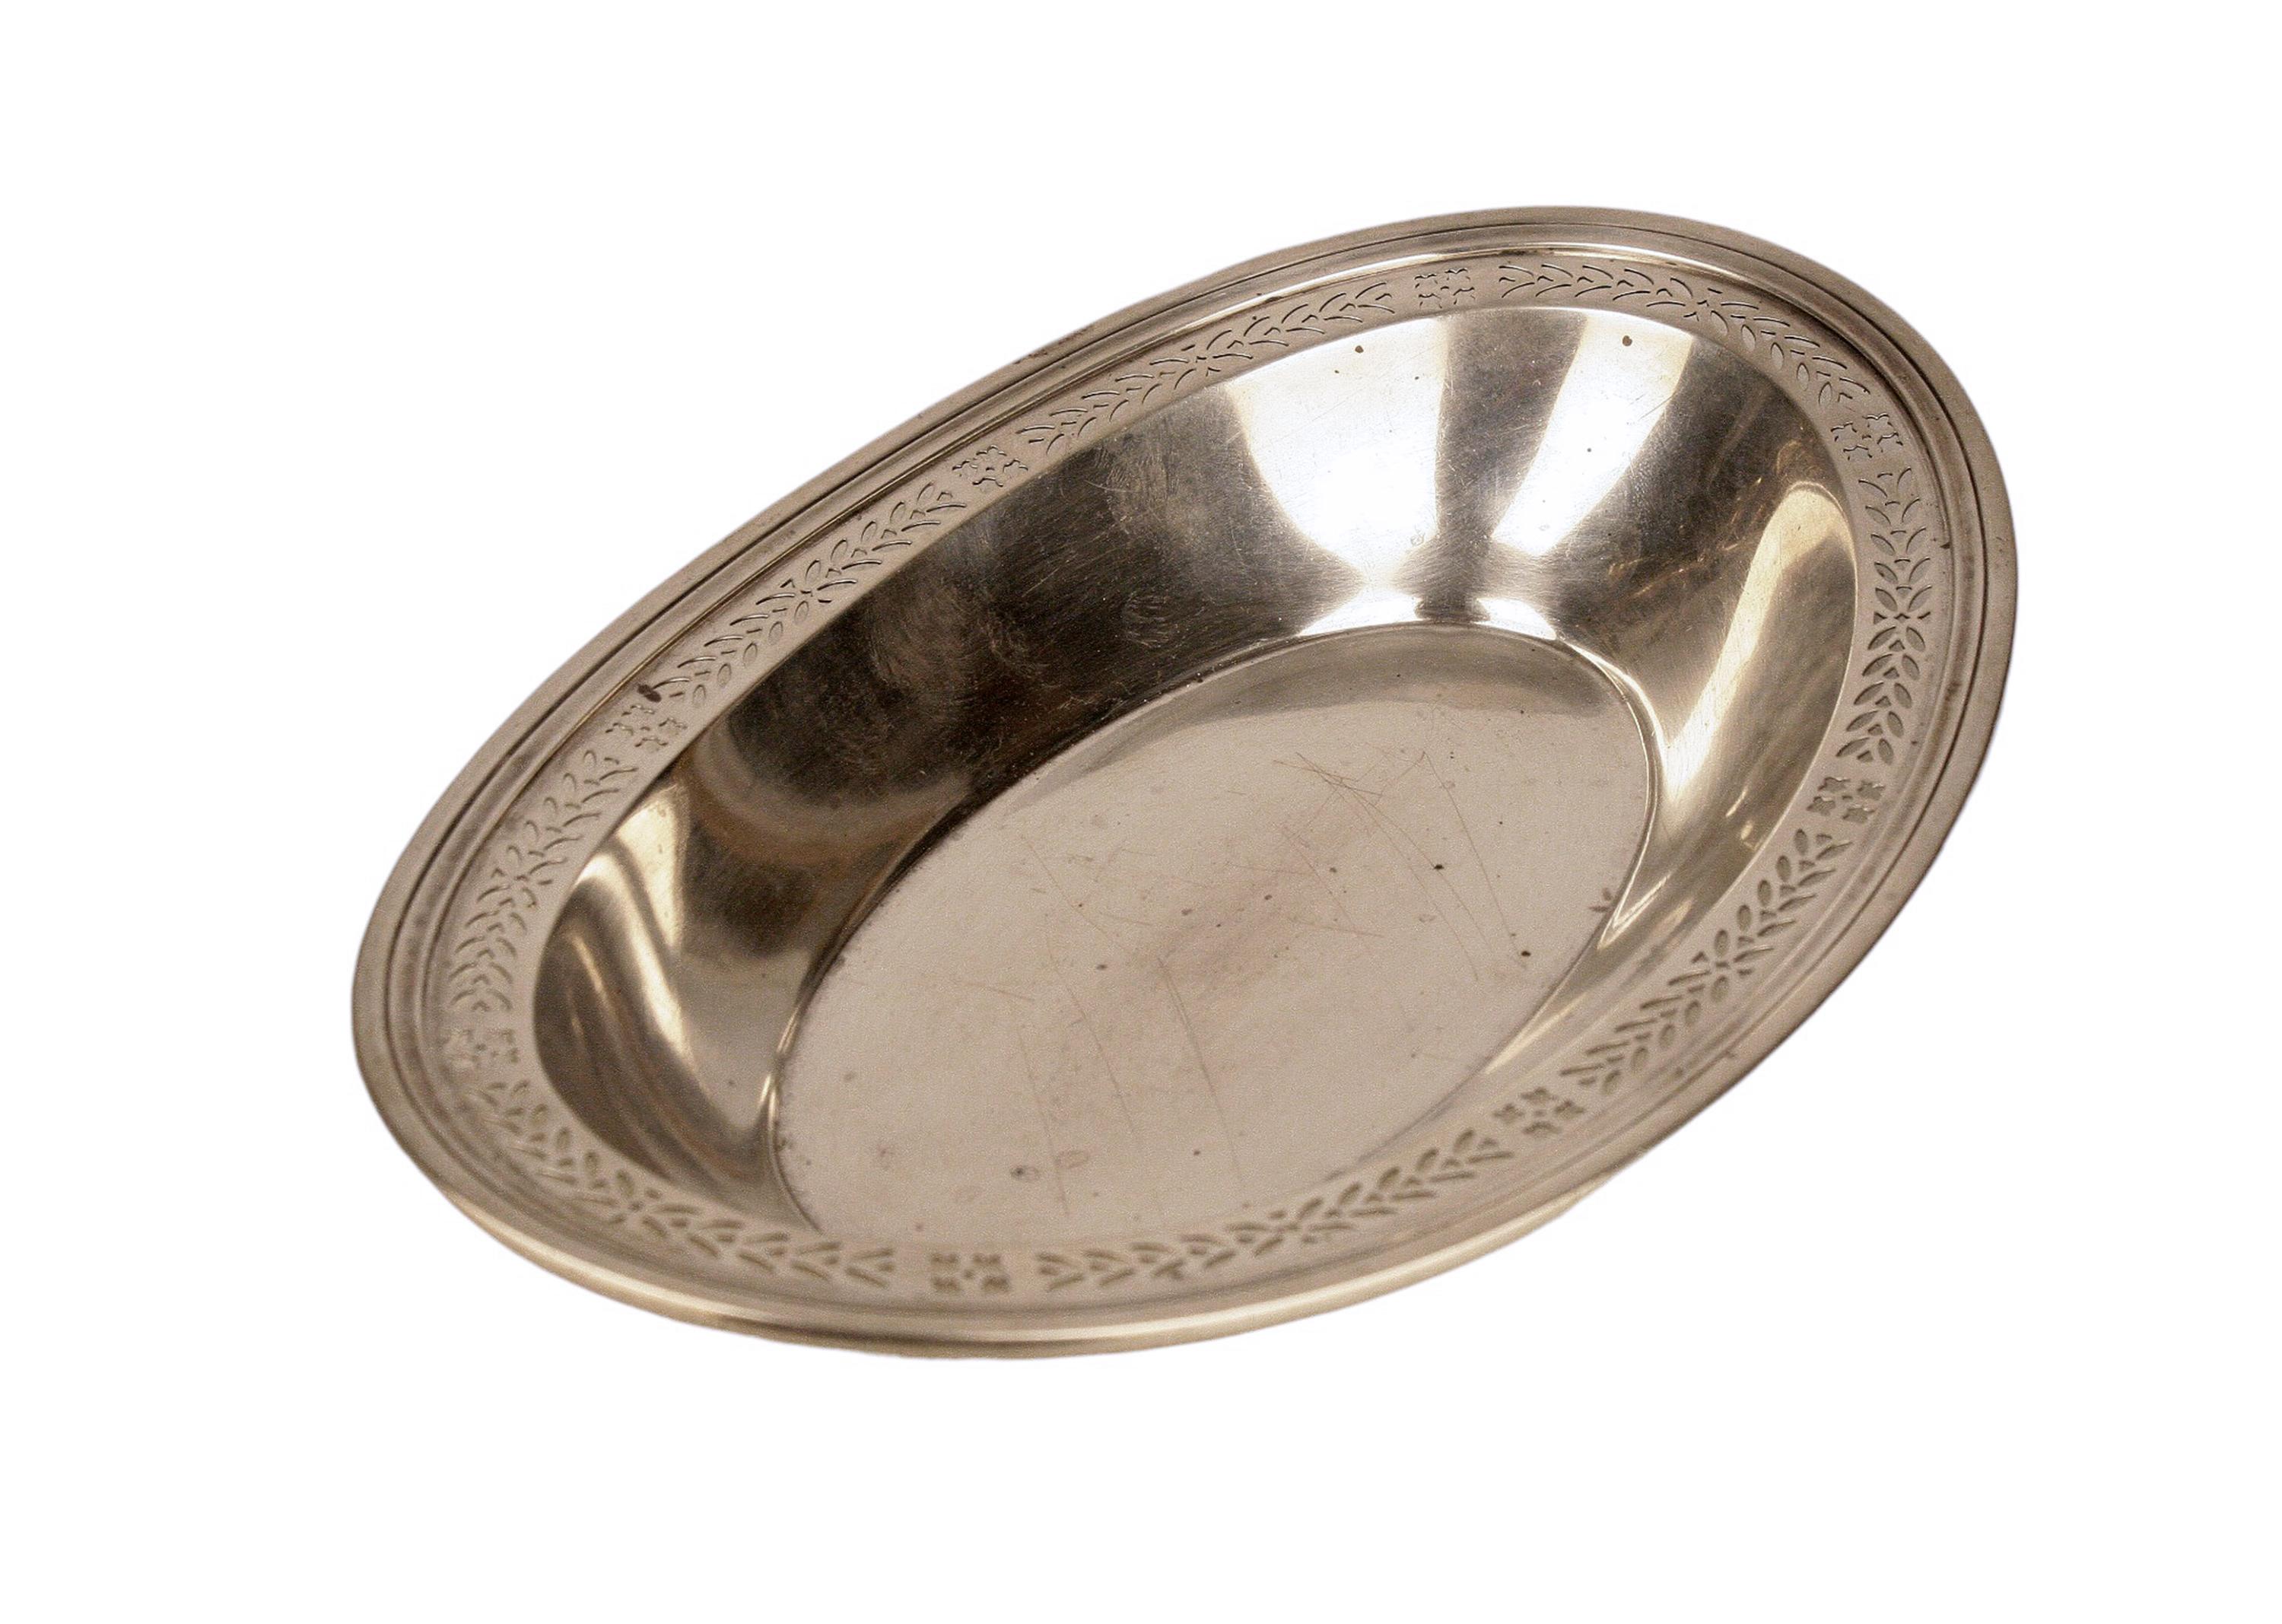 Art Deco Early 20th Century Art Déco Sterling SIlver Bread Dish-Bowl by Tiffany & Co. For Sale